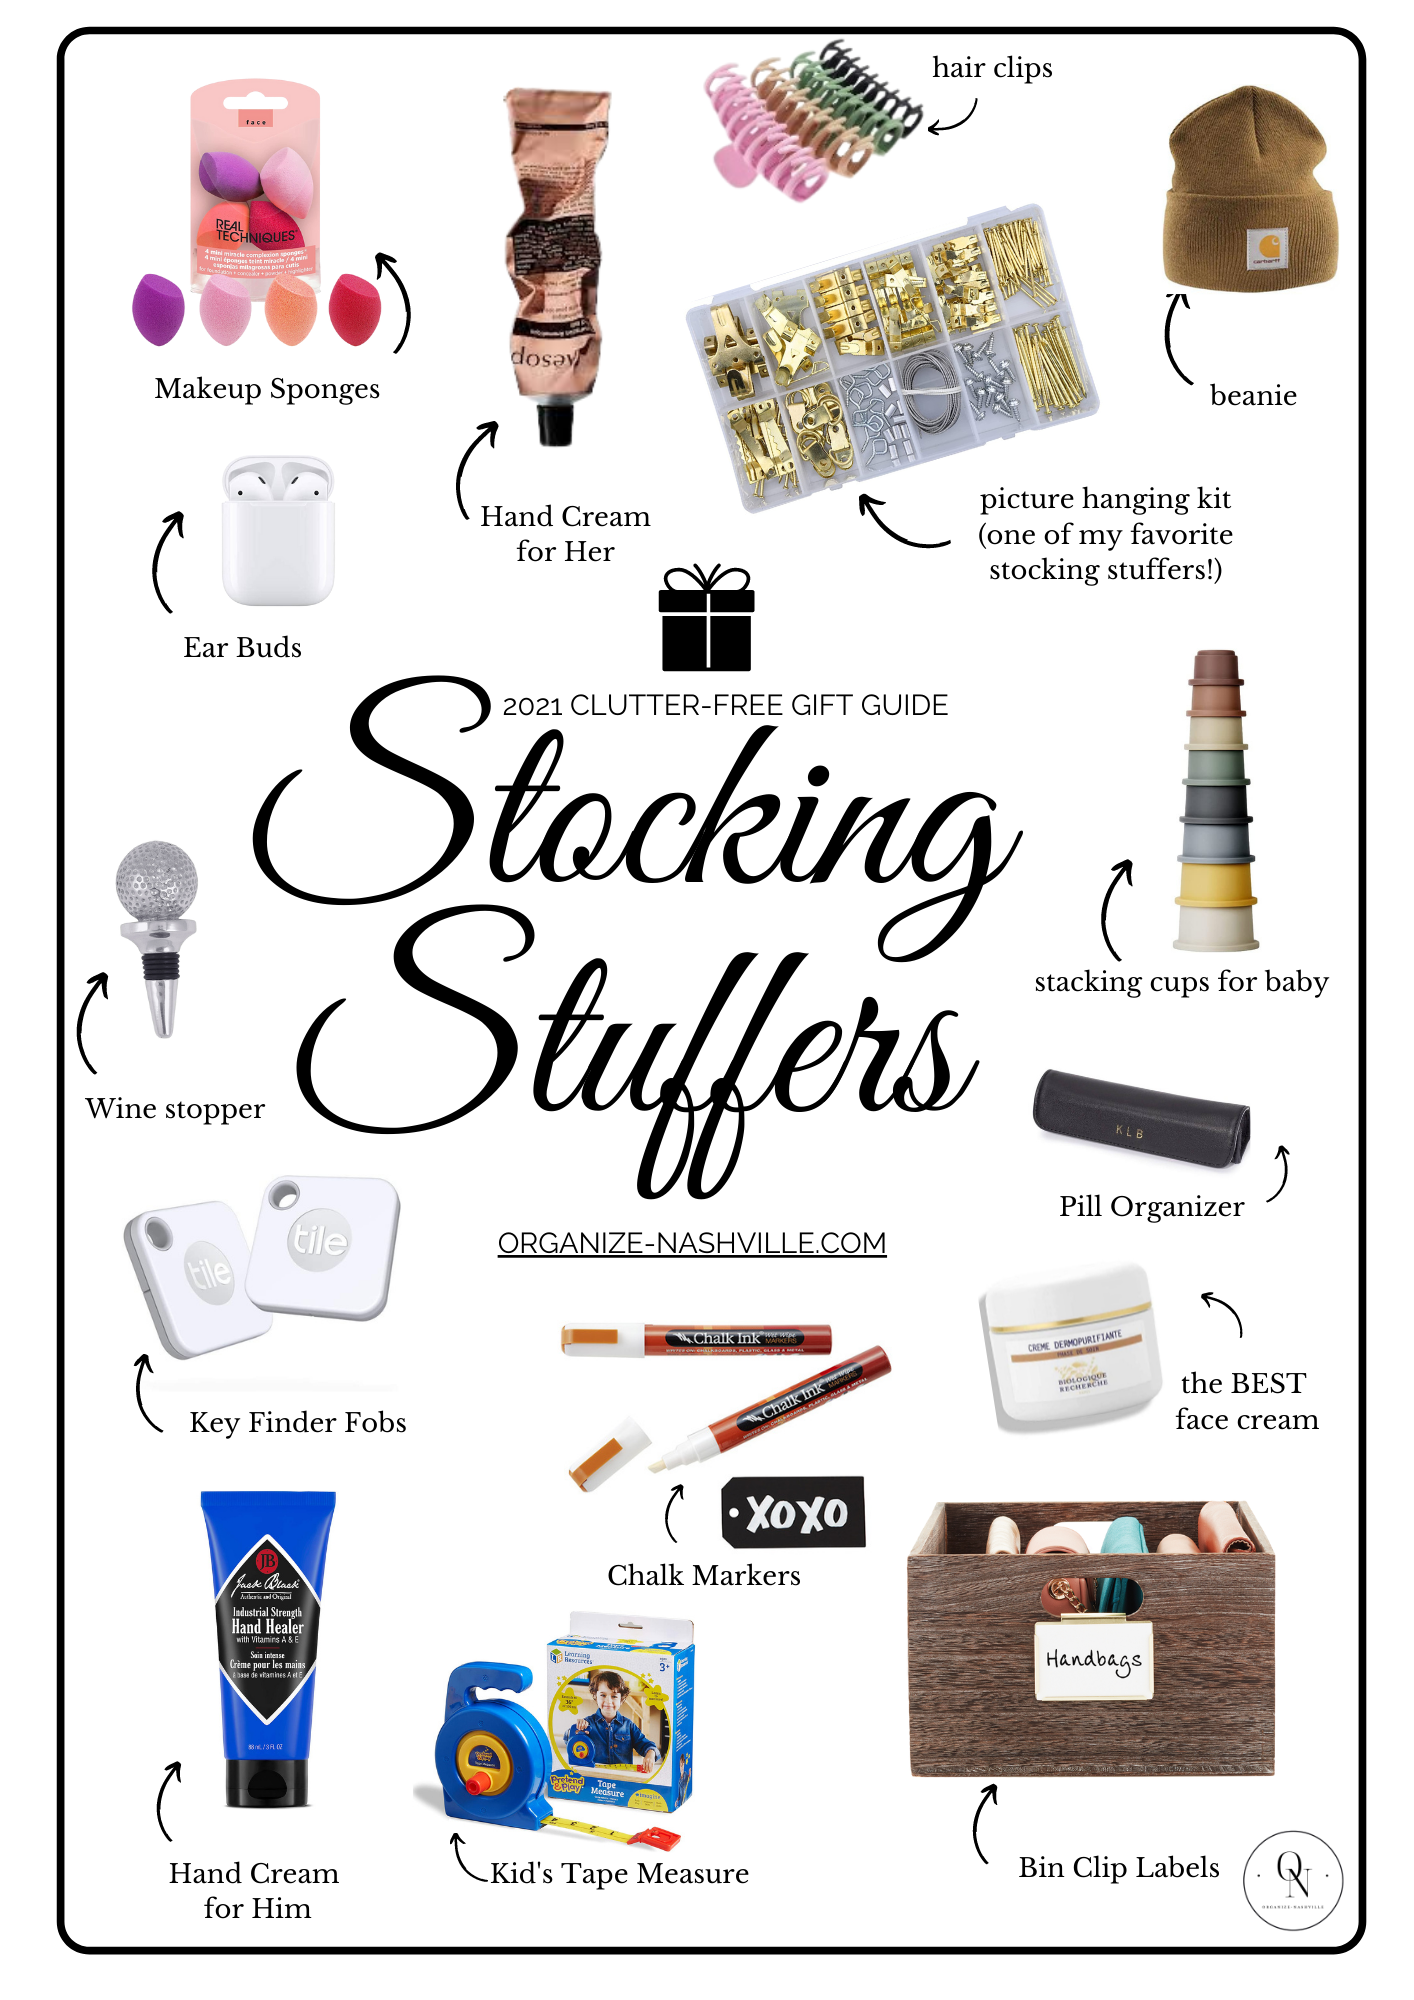 Stocking Stuffers Best Kitchen Christmas Gifts 2022, Gift Guides